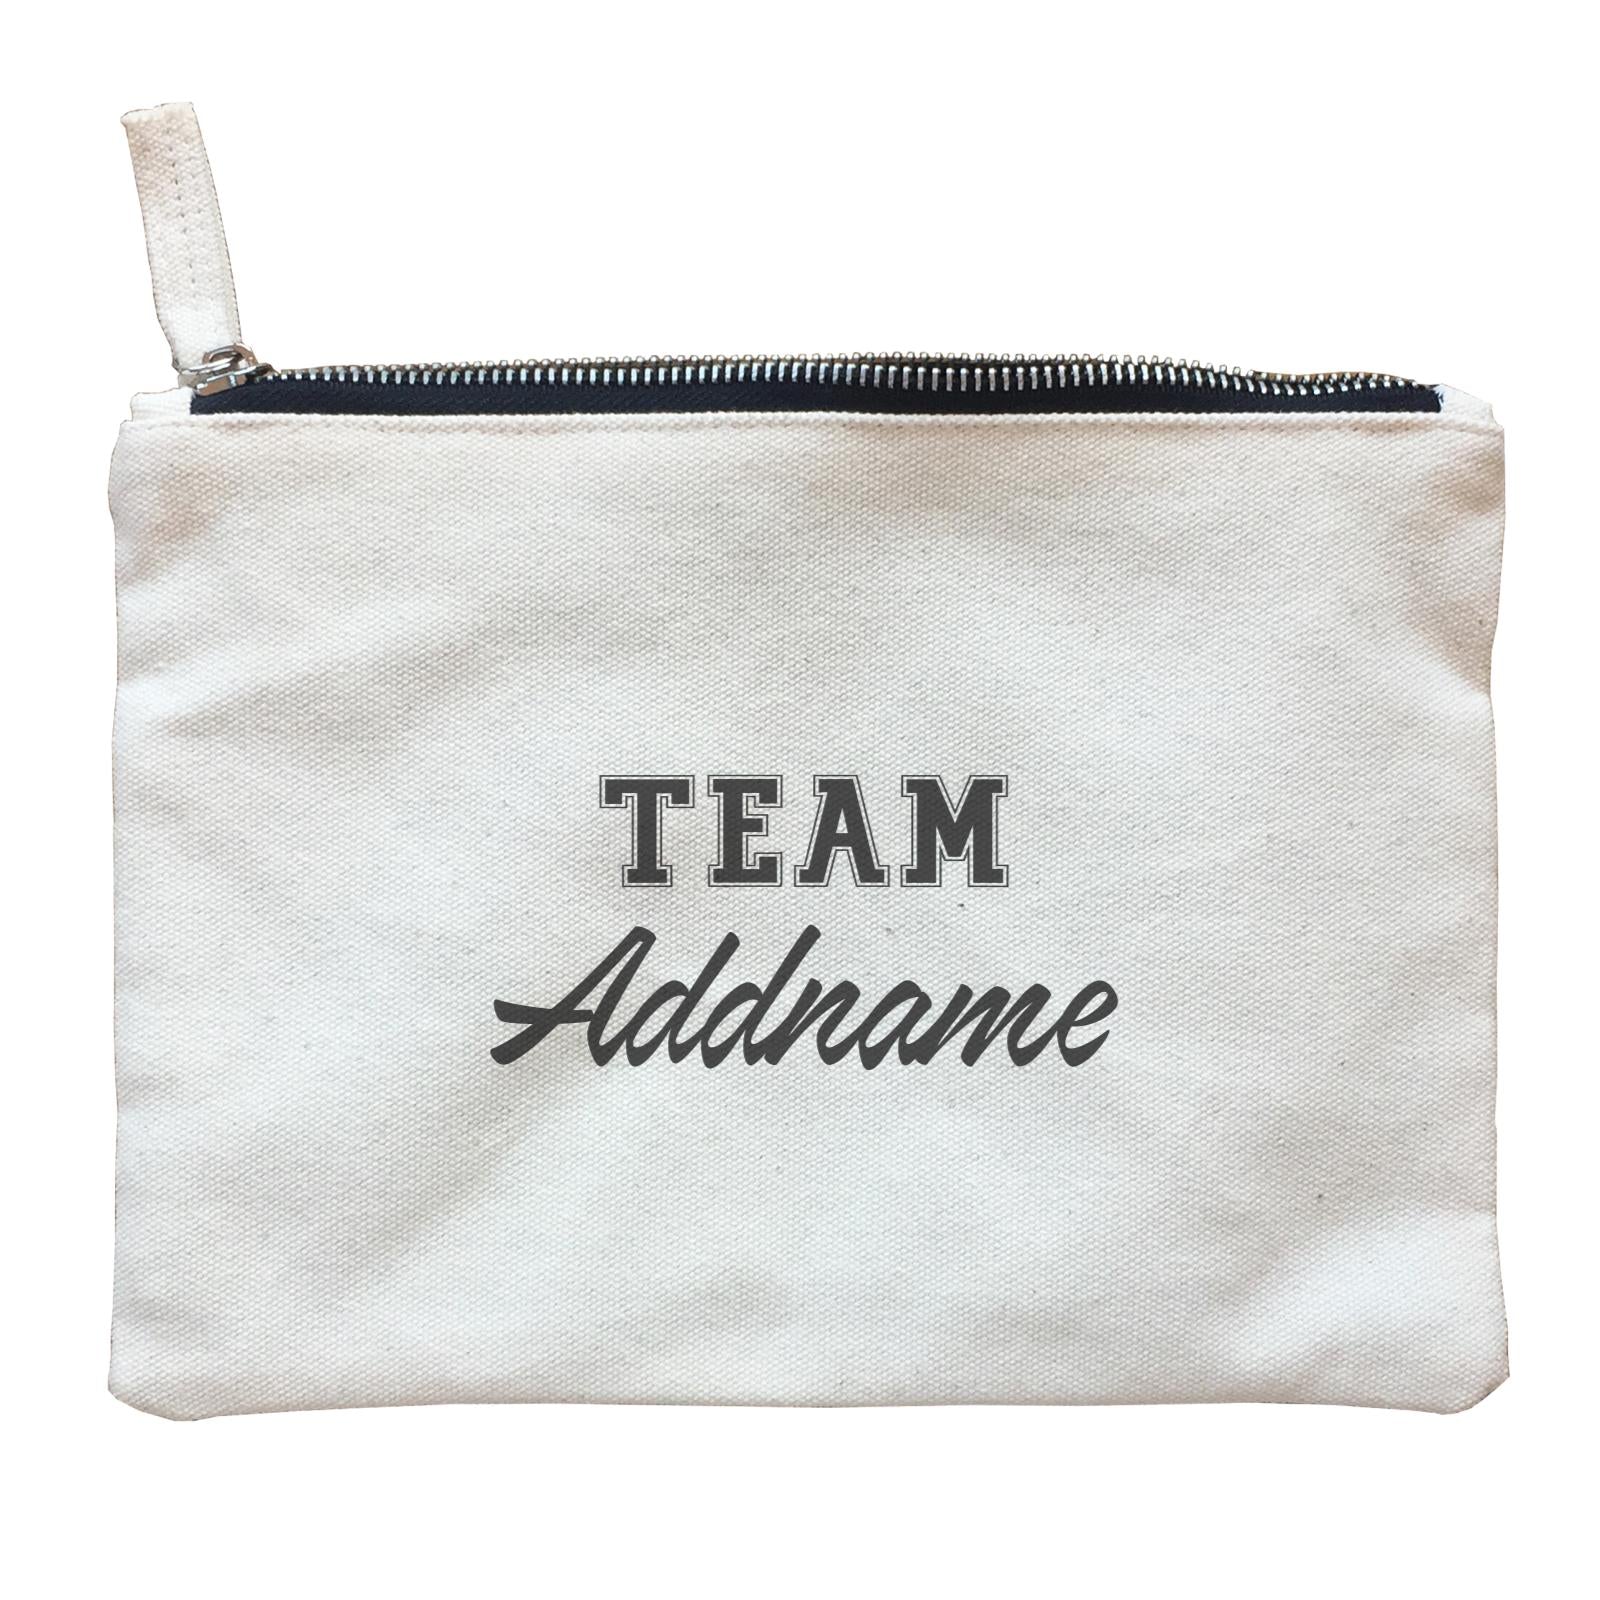 Team Family Addname Accessories Zipper Pouch